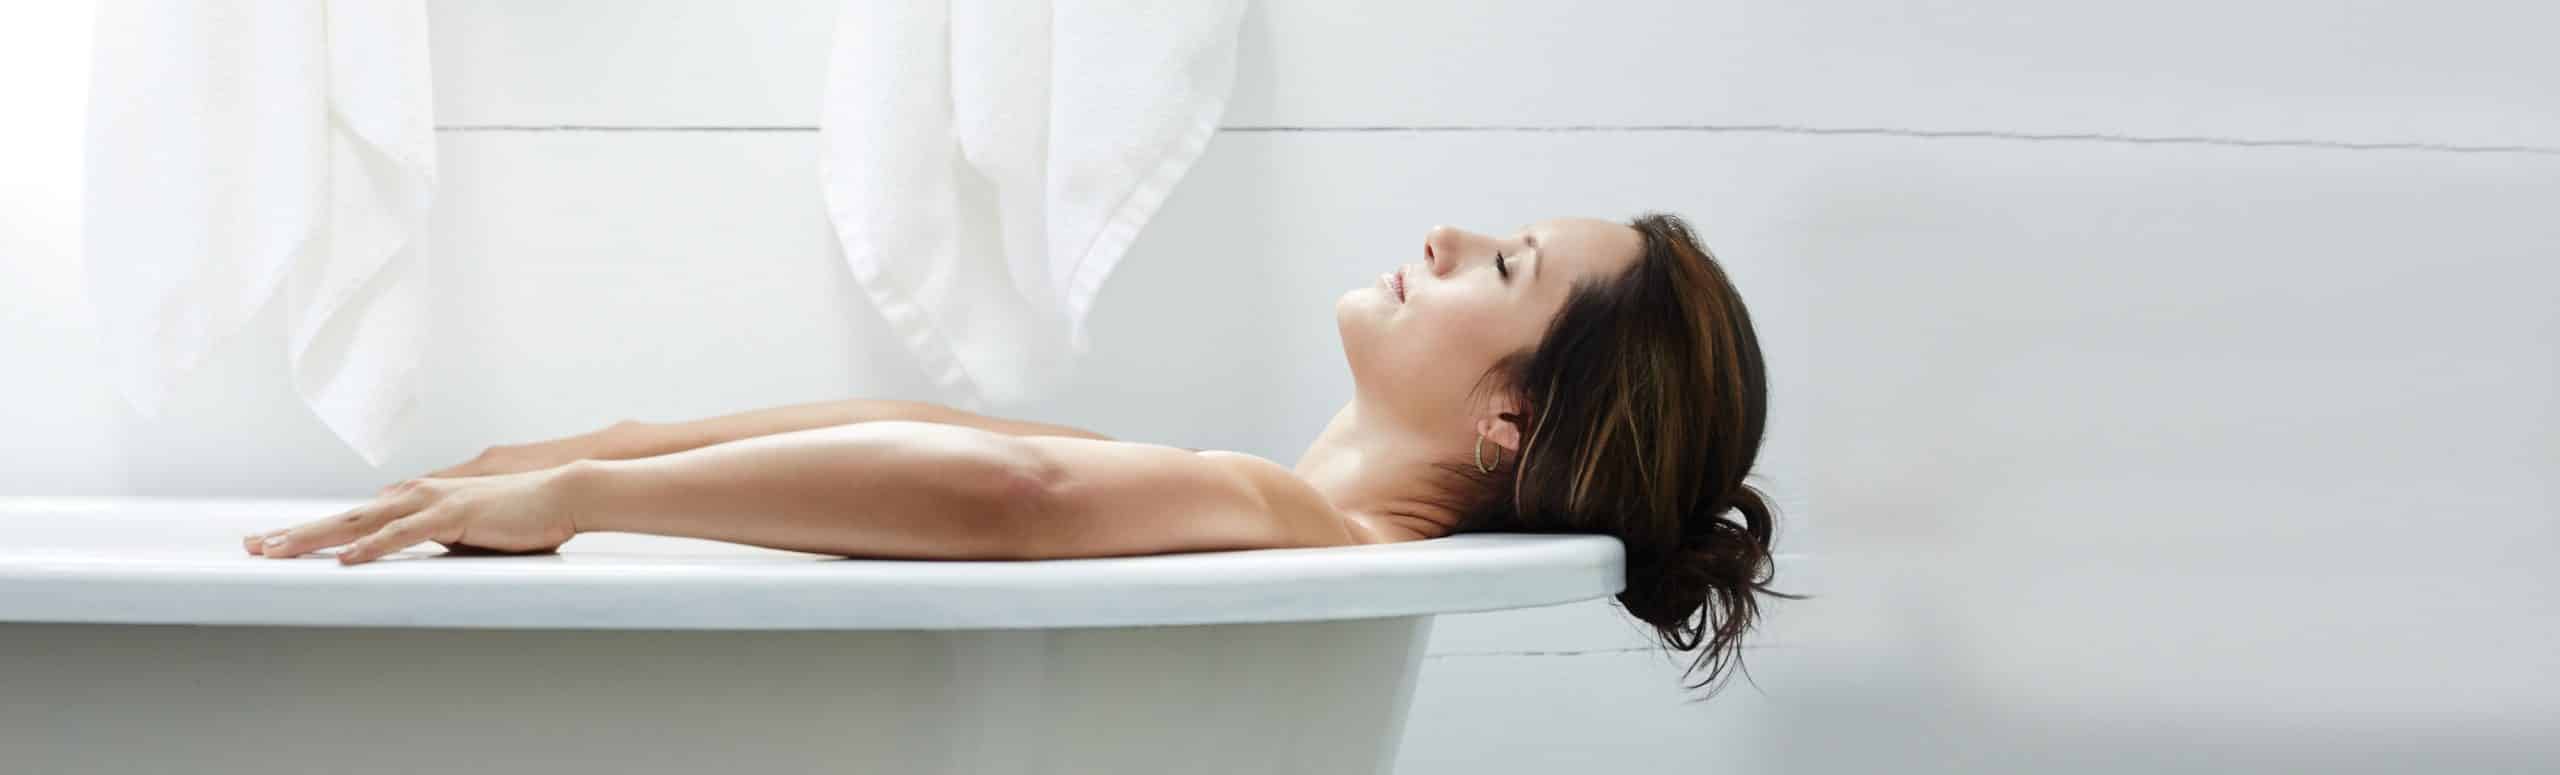 Person laying in a bathtub relaxed and looking upwards